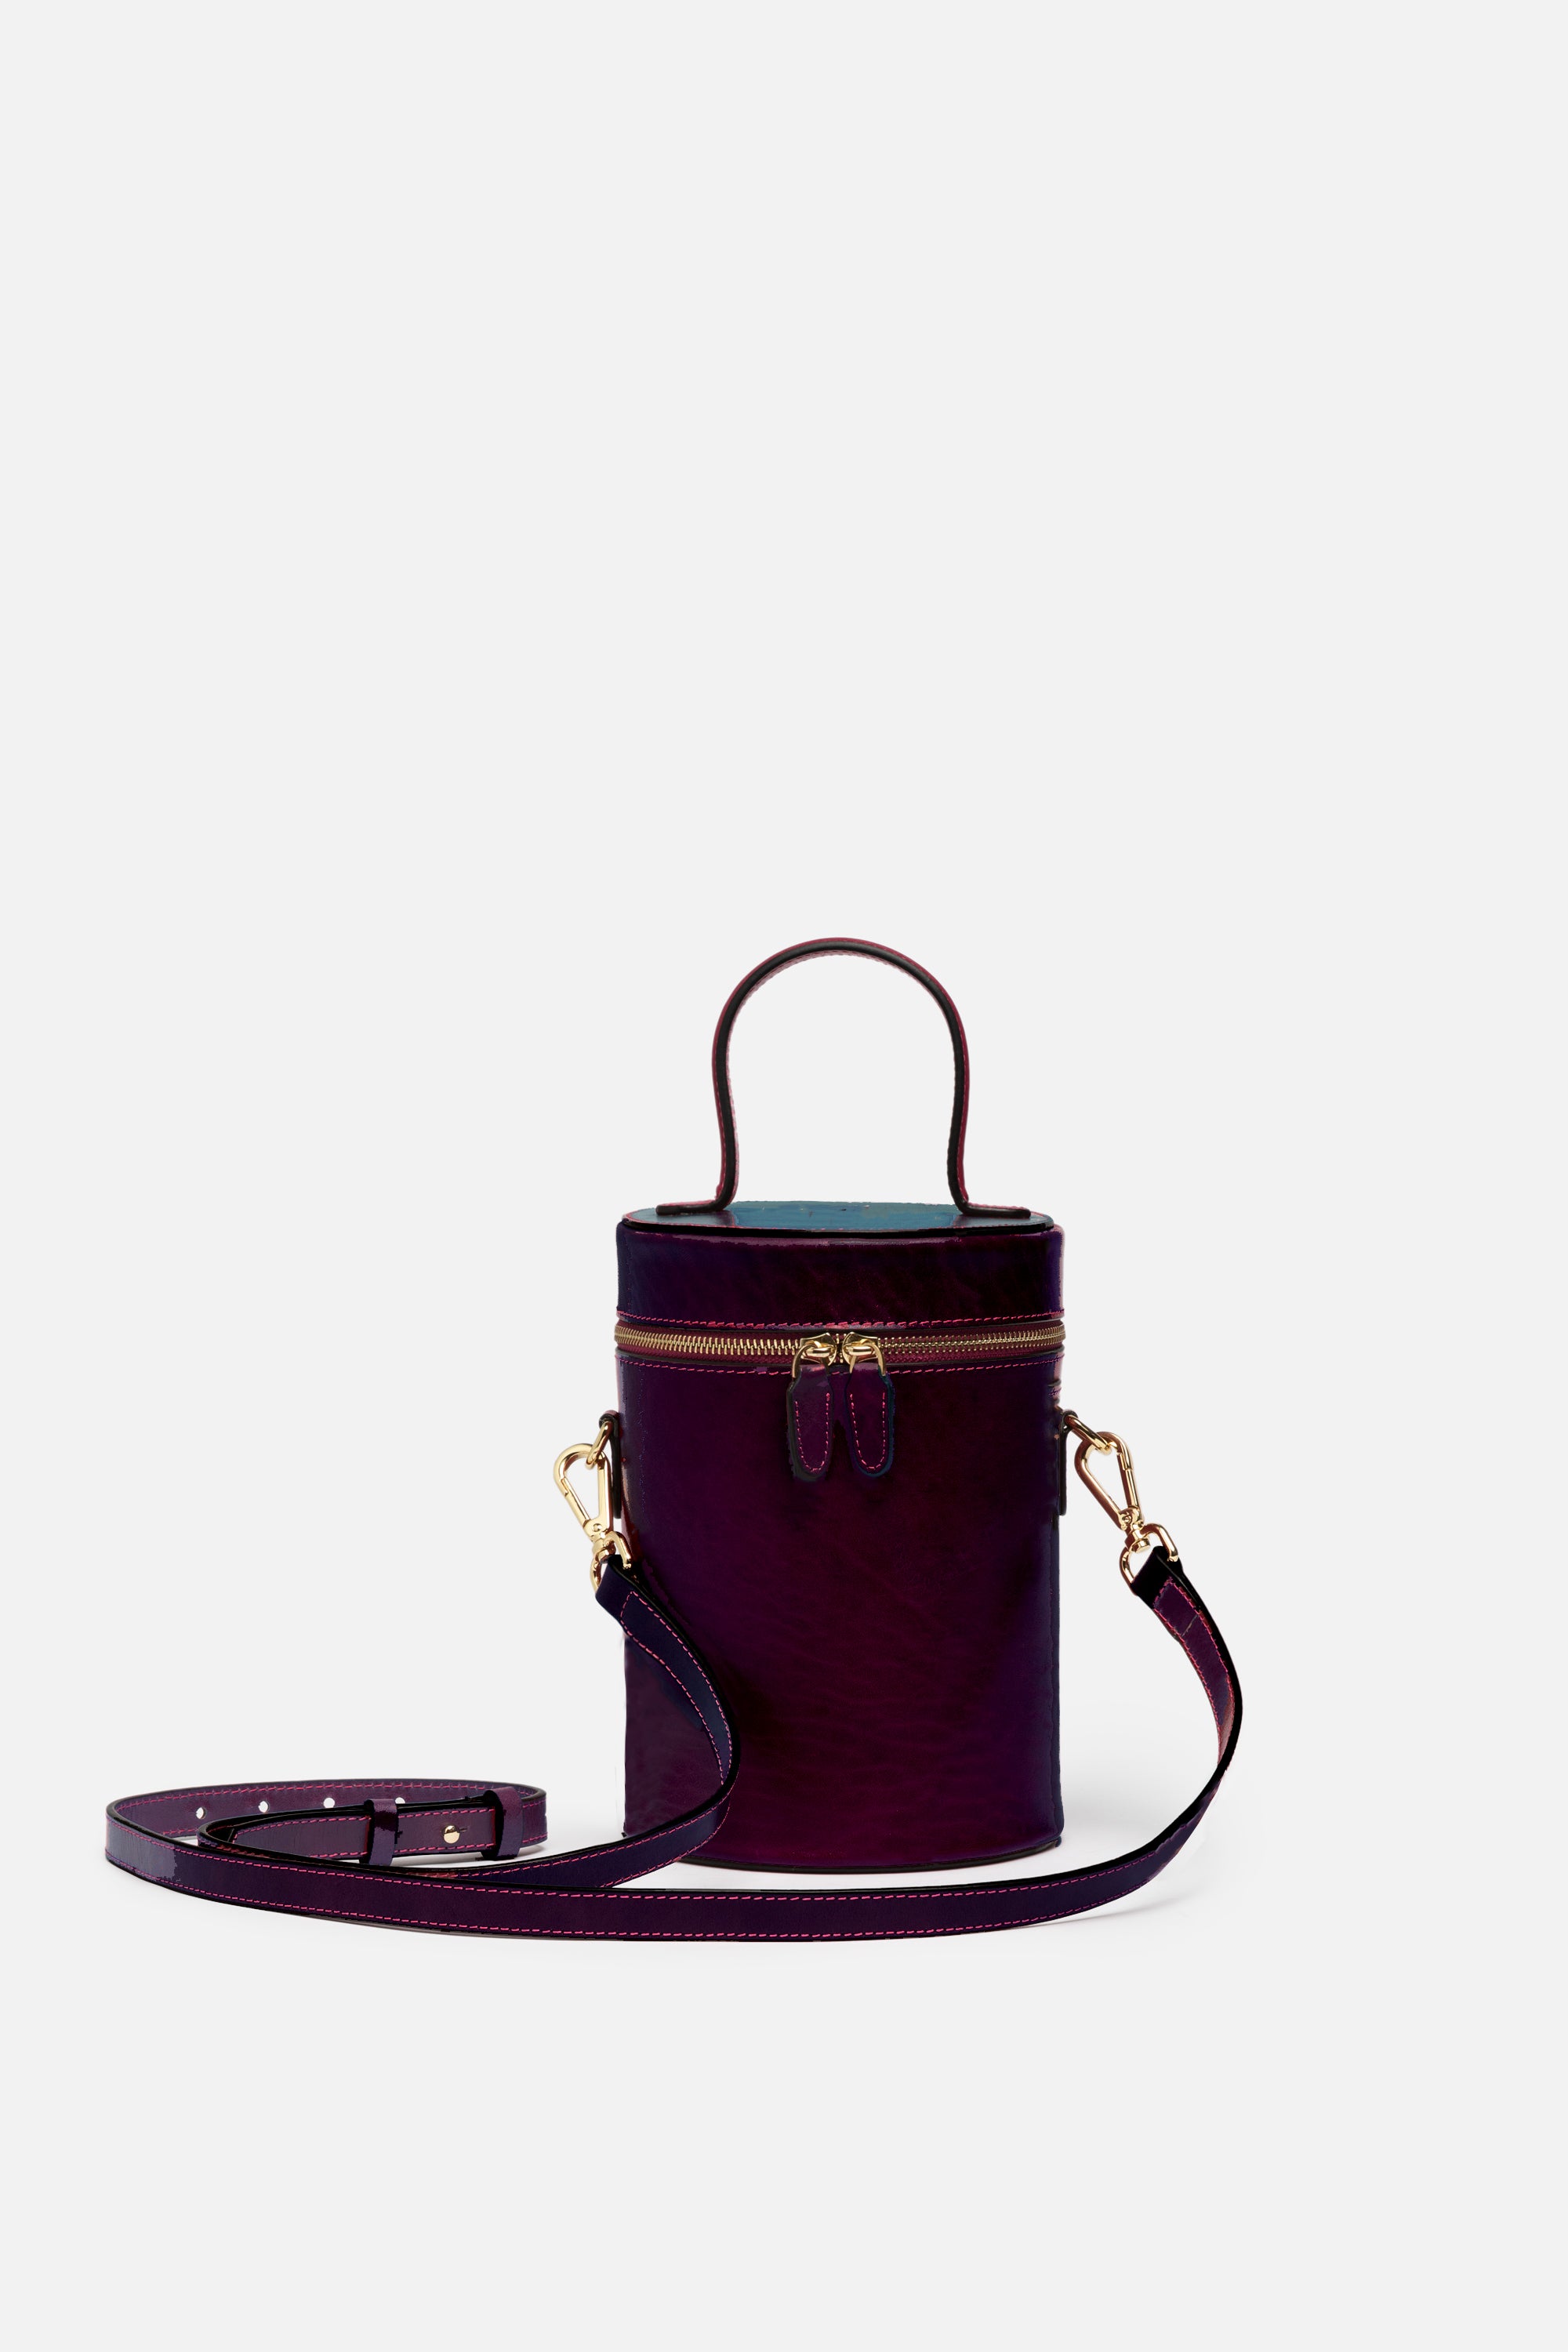 The Designer Bags That Were Everywhere in 2019  Bags designer, Best  designer bags, Bucket bags outfit